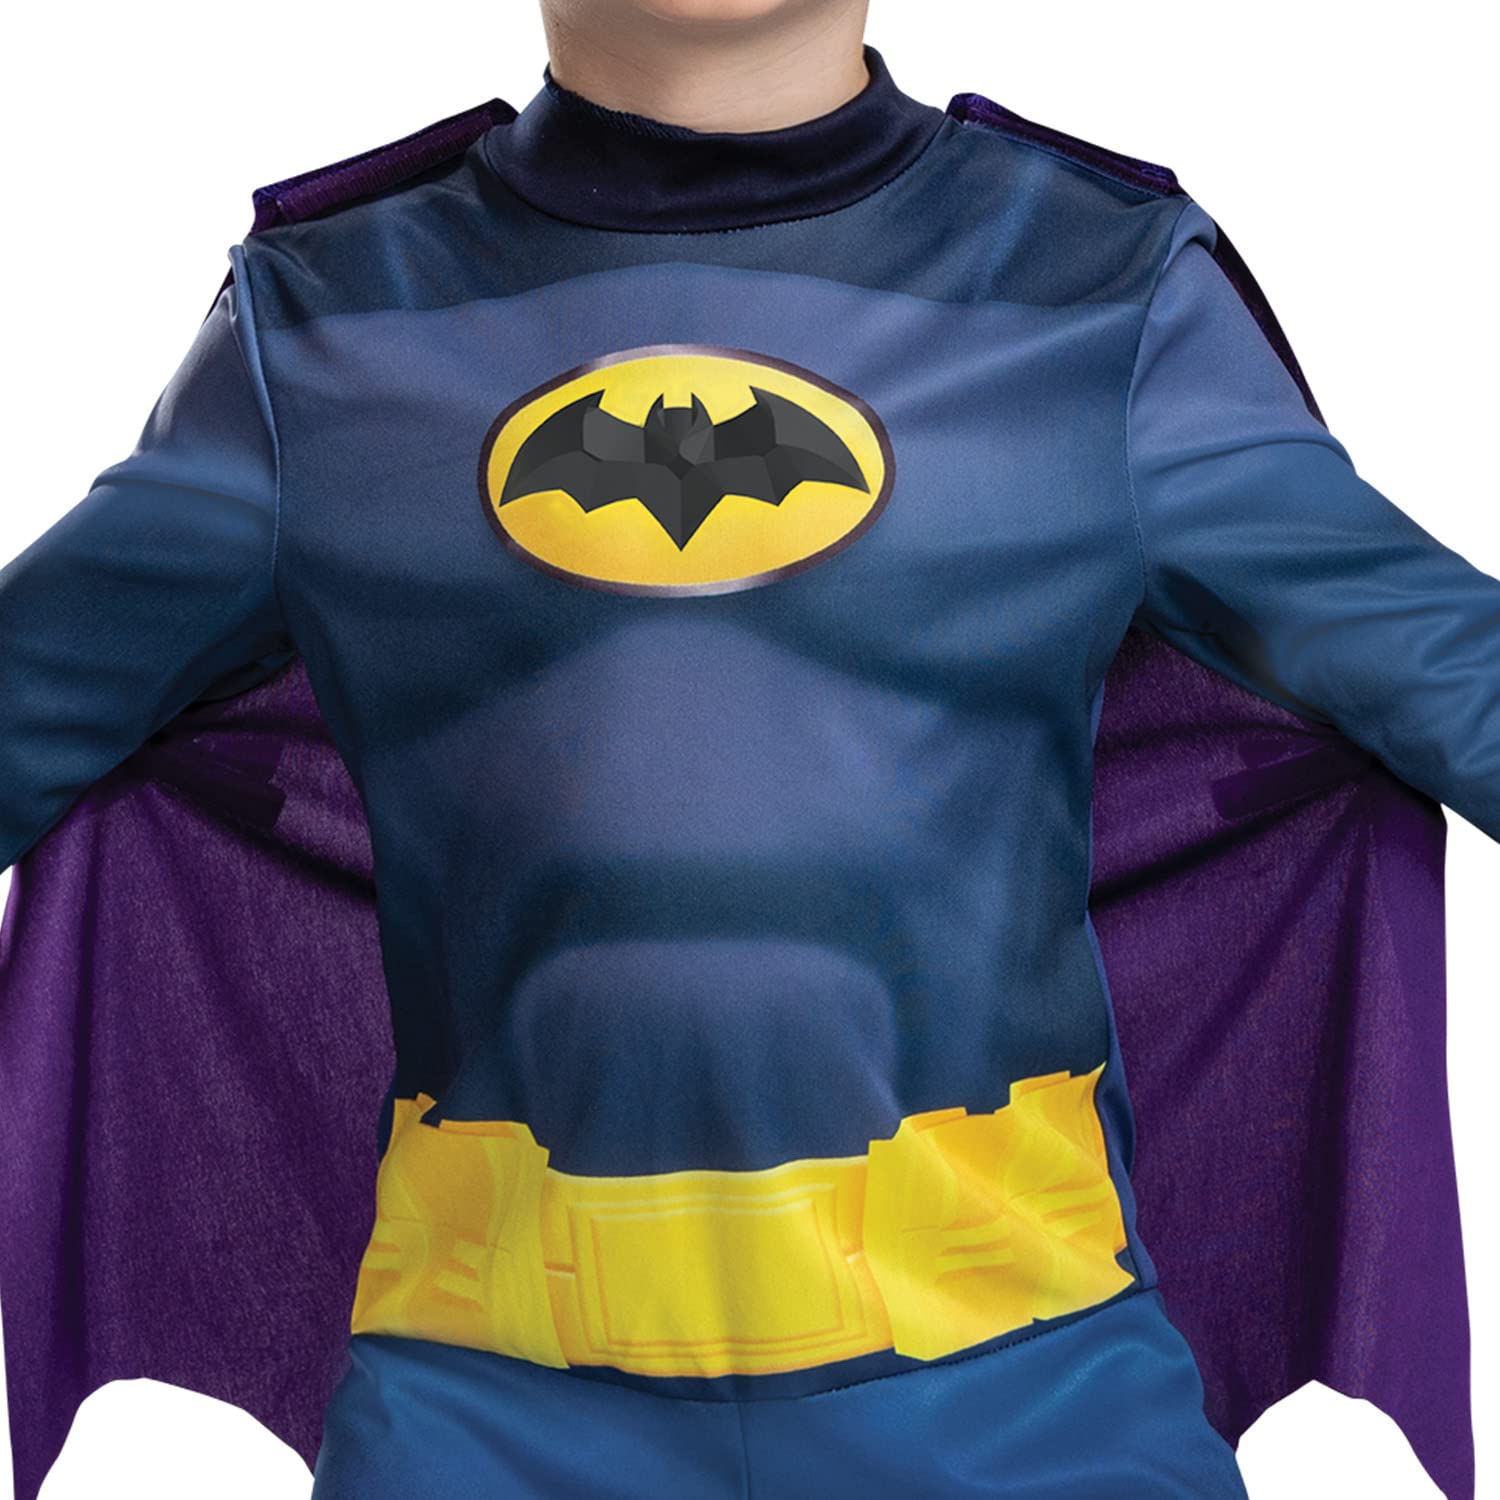 Disguise Batwheels Batman Costume for Kids, Official Batwheels Costume Outfit and Headpiece, Size (2T)